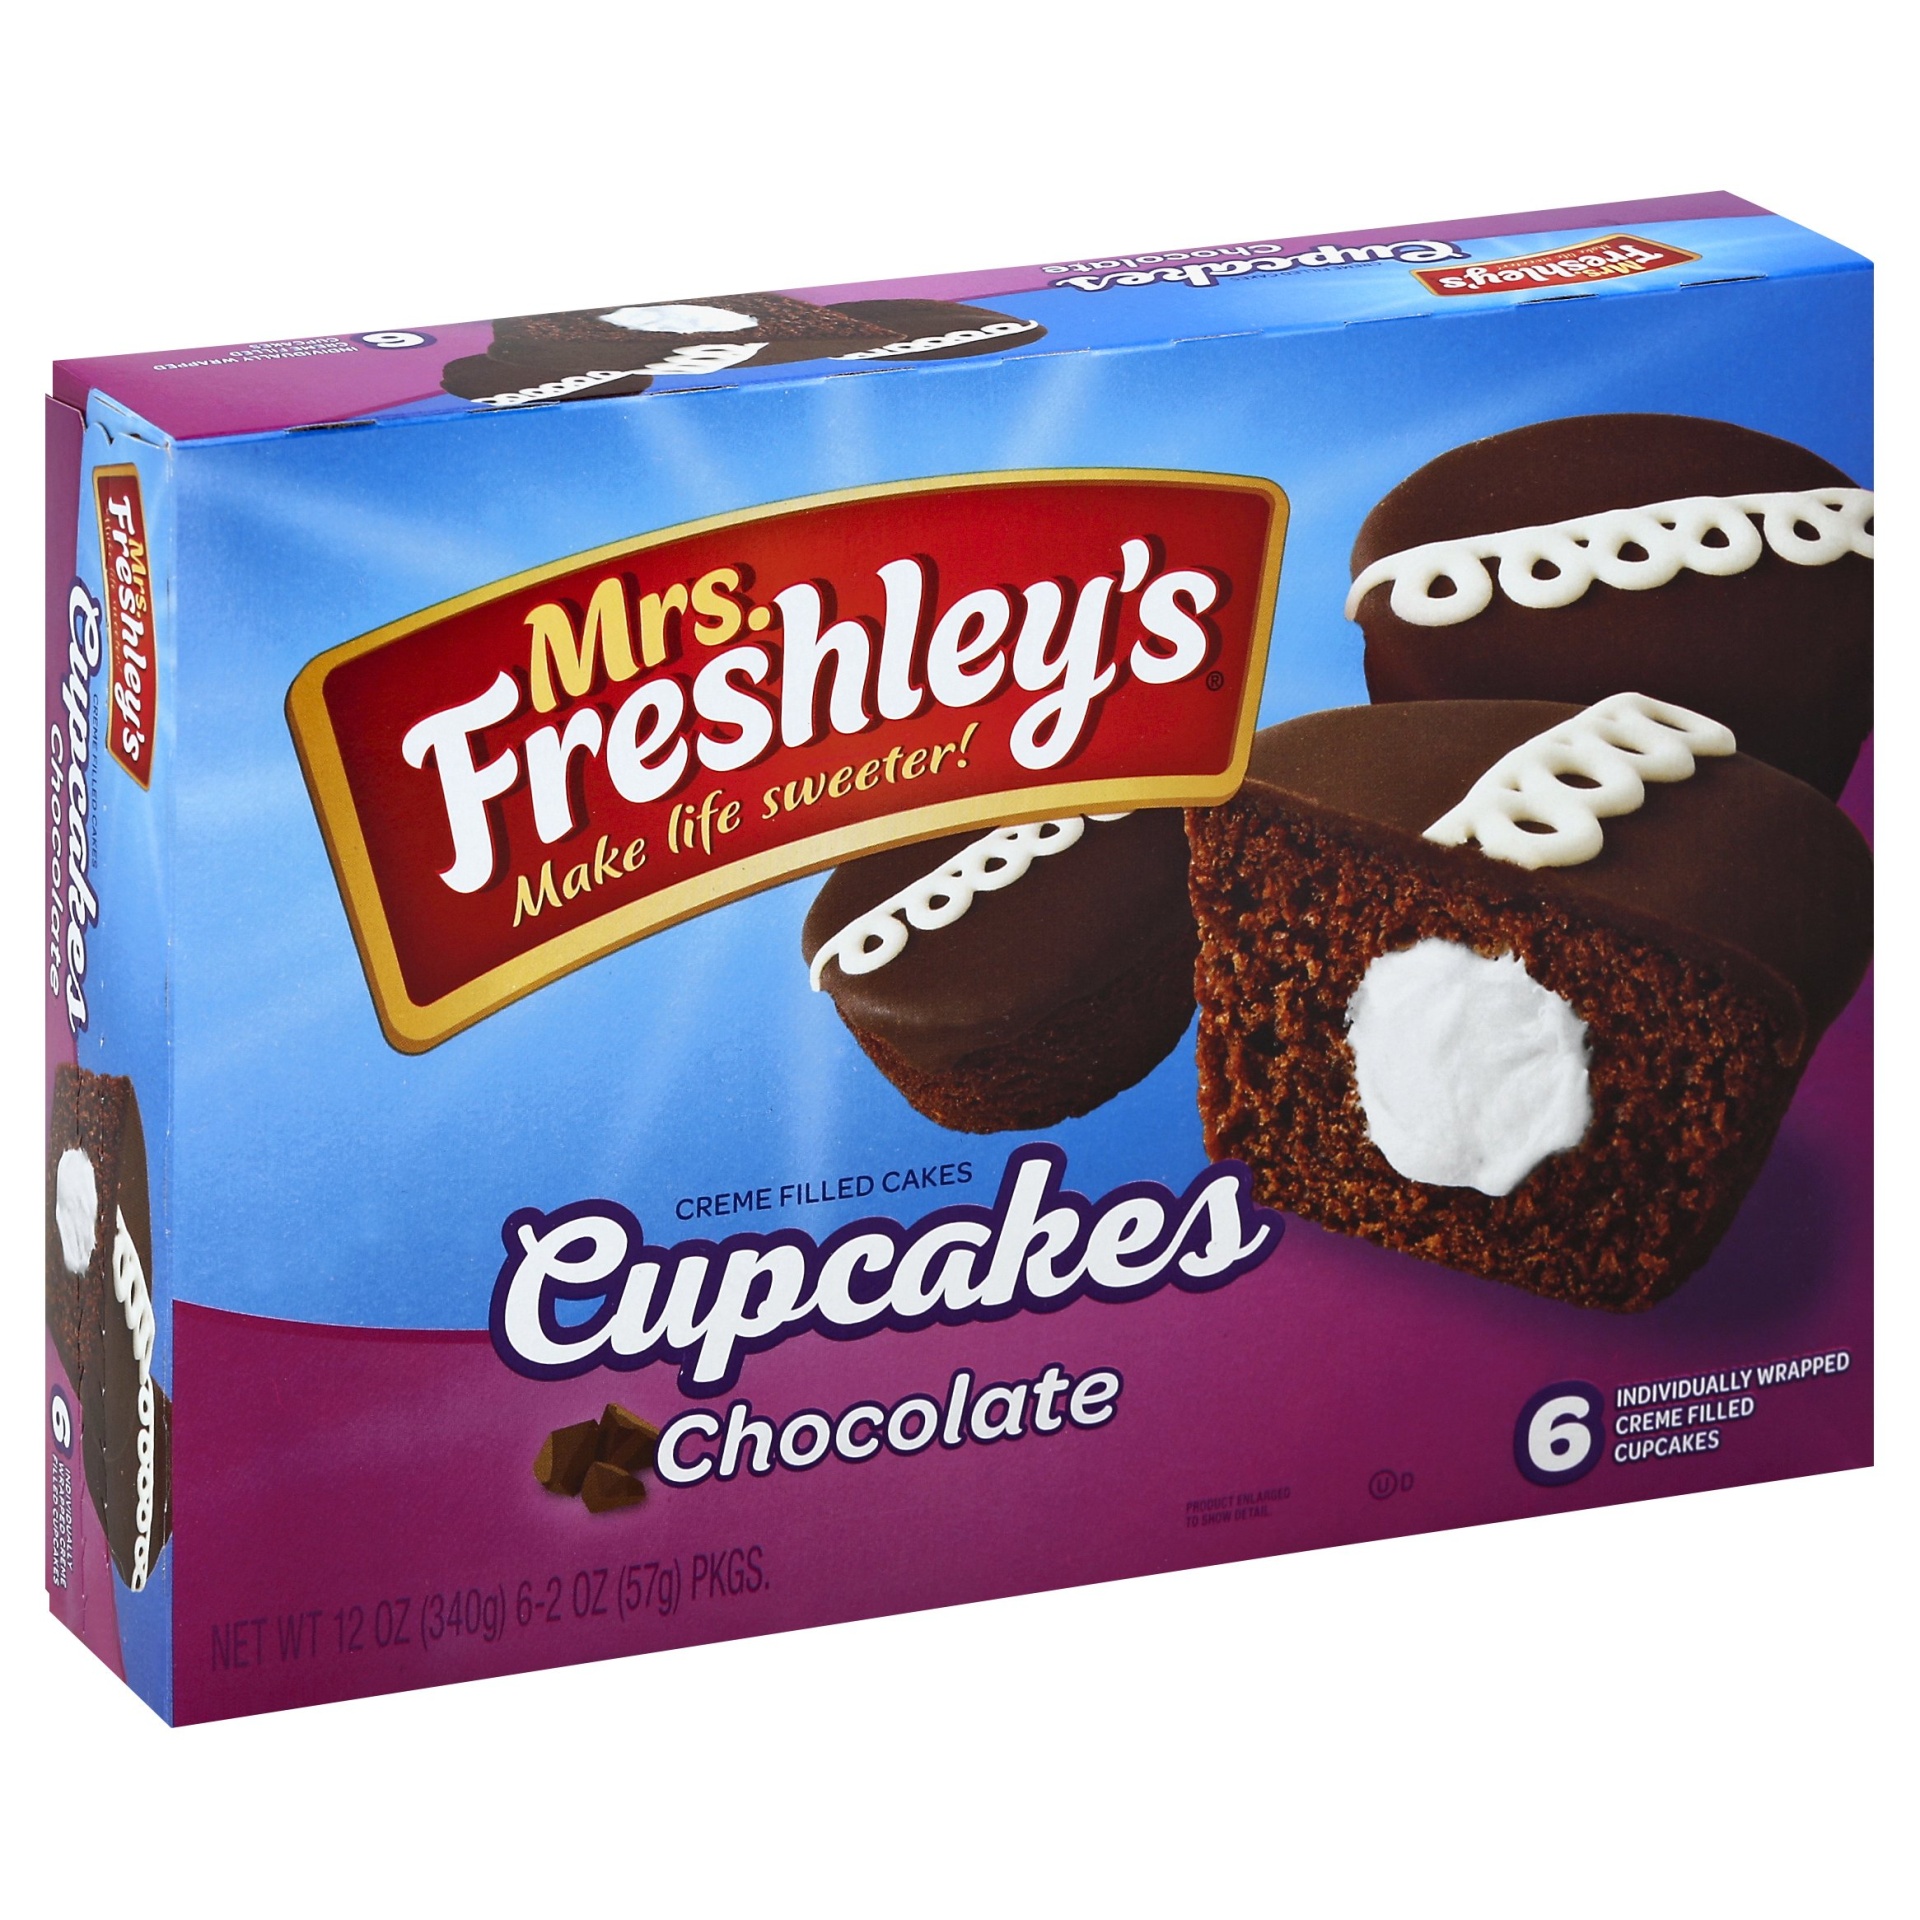 slide 1 of 1, Mrs. Freshley's Chocolate Cupcakes Creme Filled Cakes, 6 ct; 2 oz